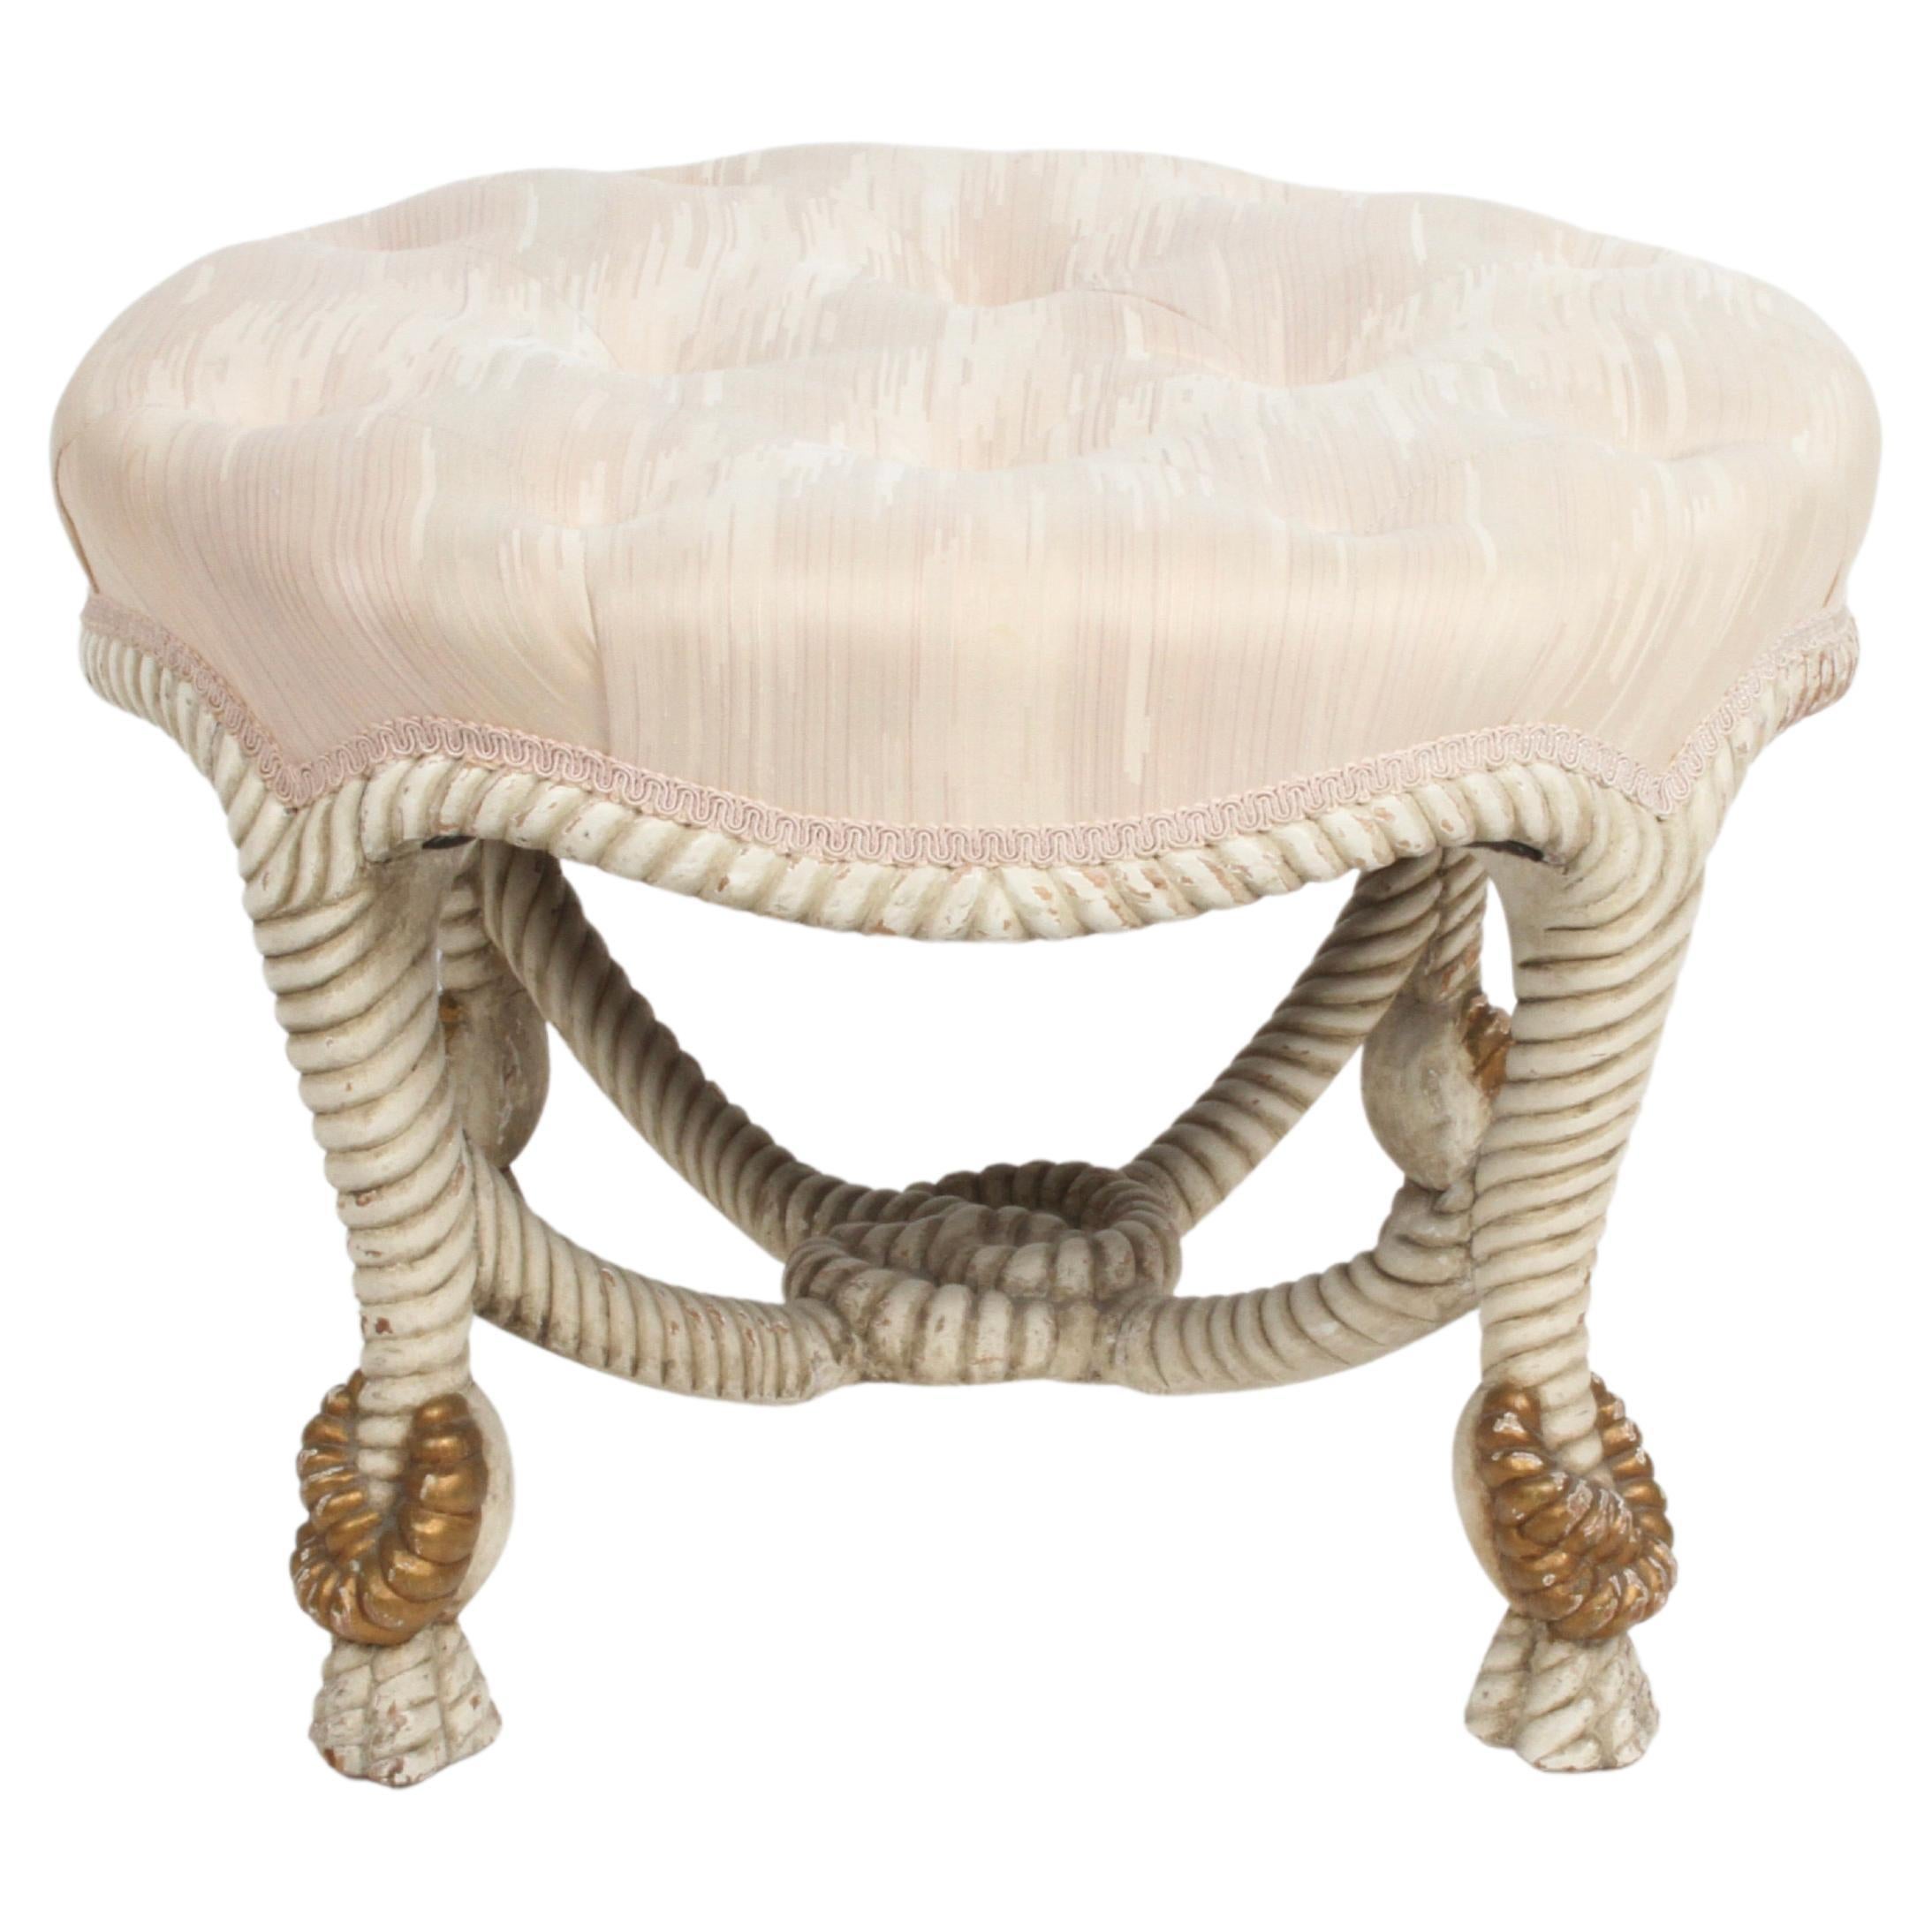 Vintage 40's Italian Cream & Gold Gilt Faux Rope Tassel Ottoman, Stool or Bench For Sale